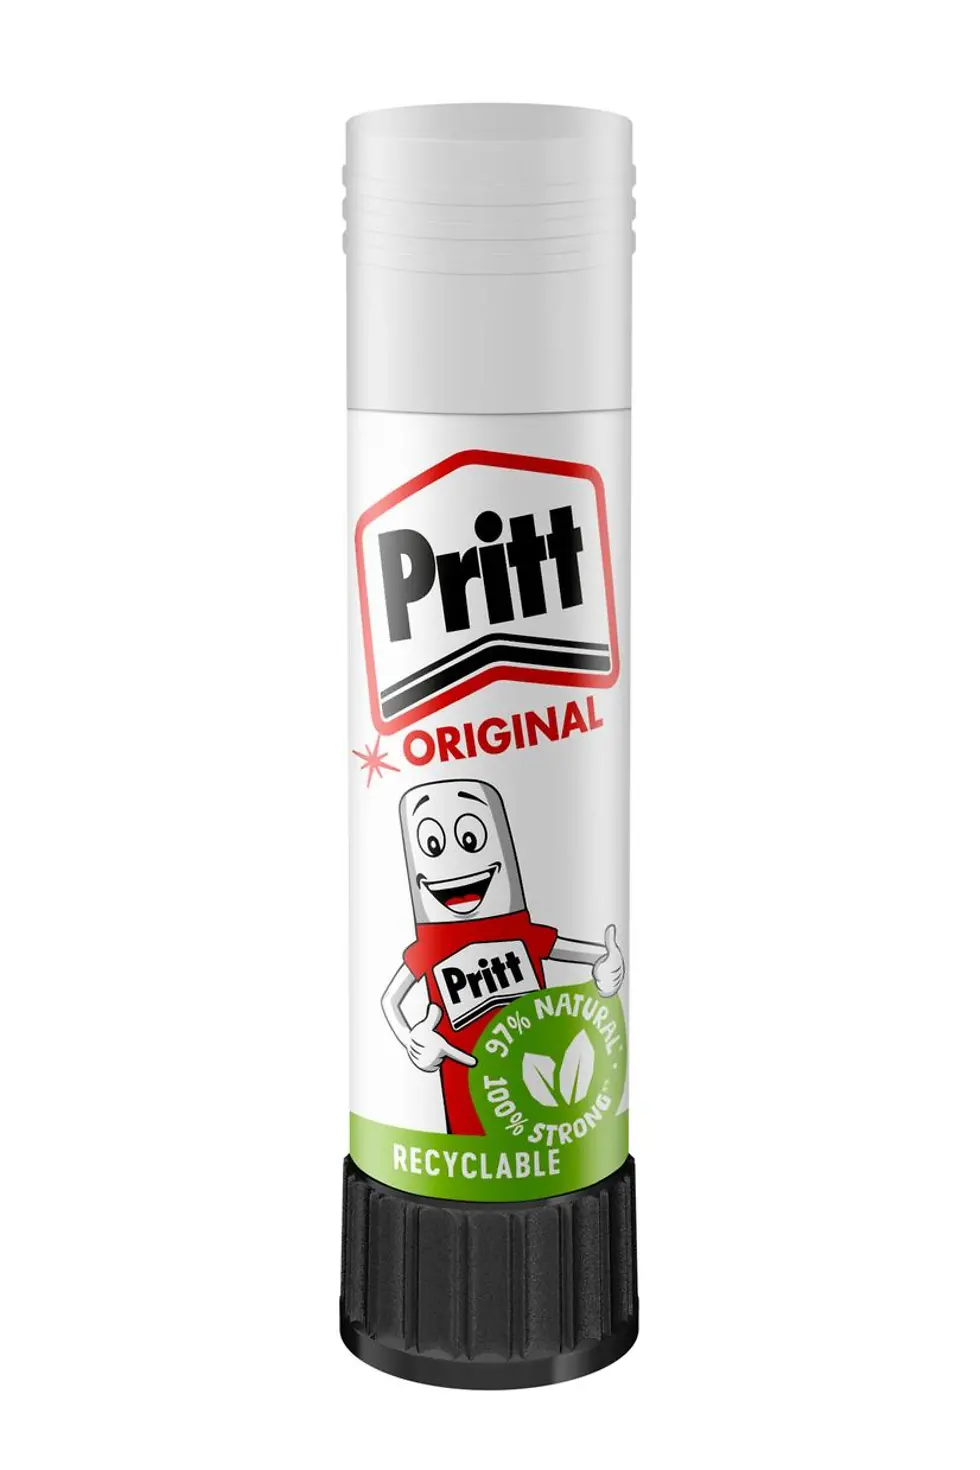 Pritt stick, which now offers improved sustainability to consumers